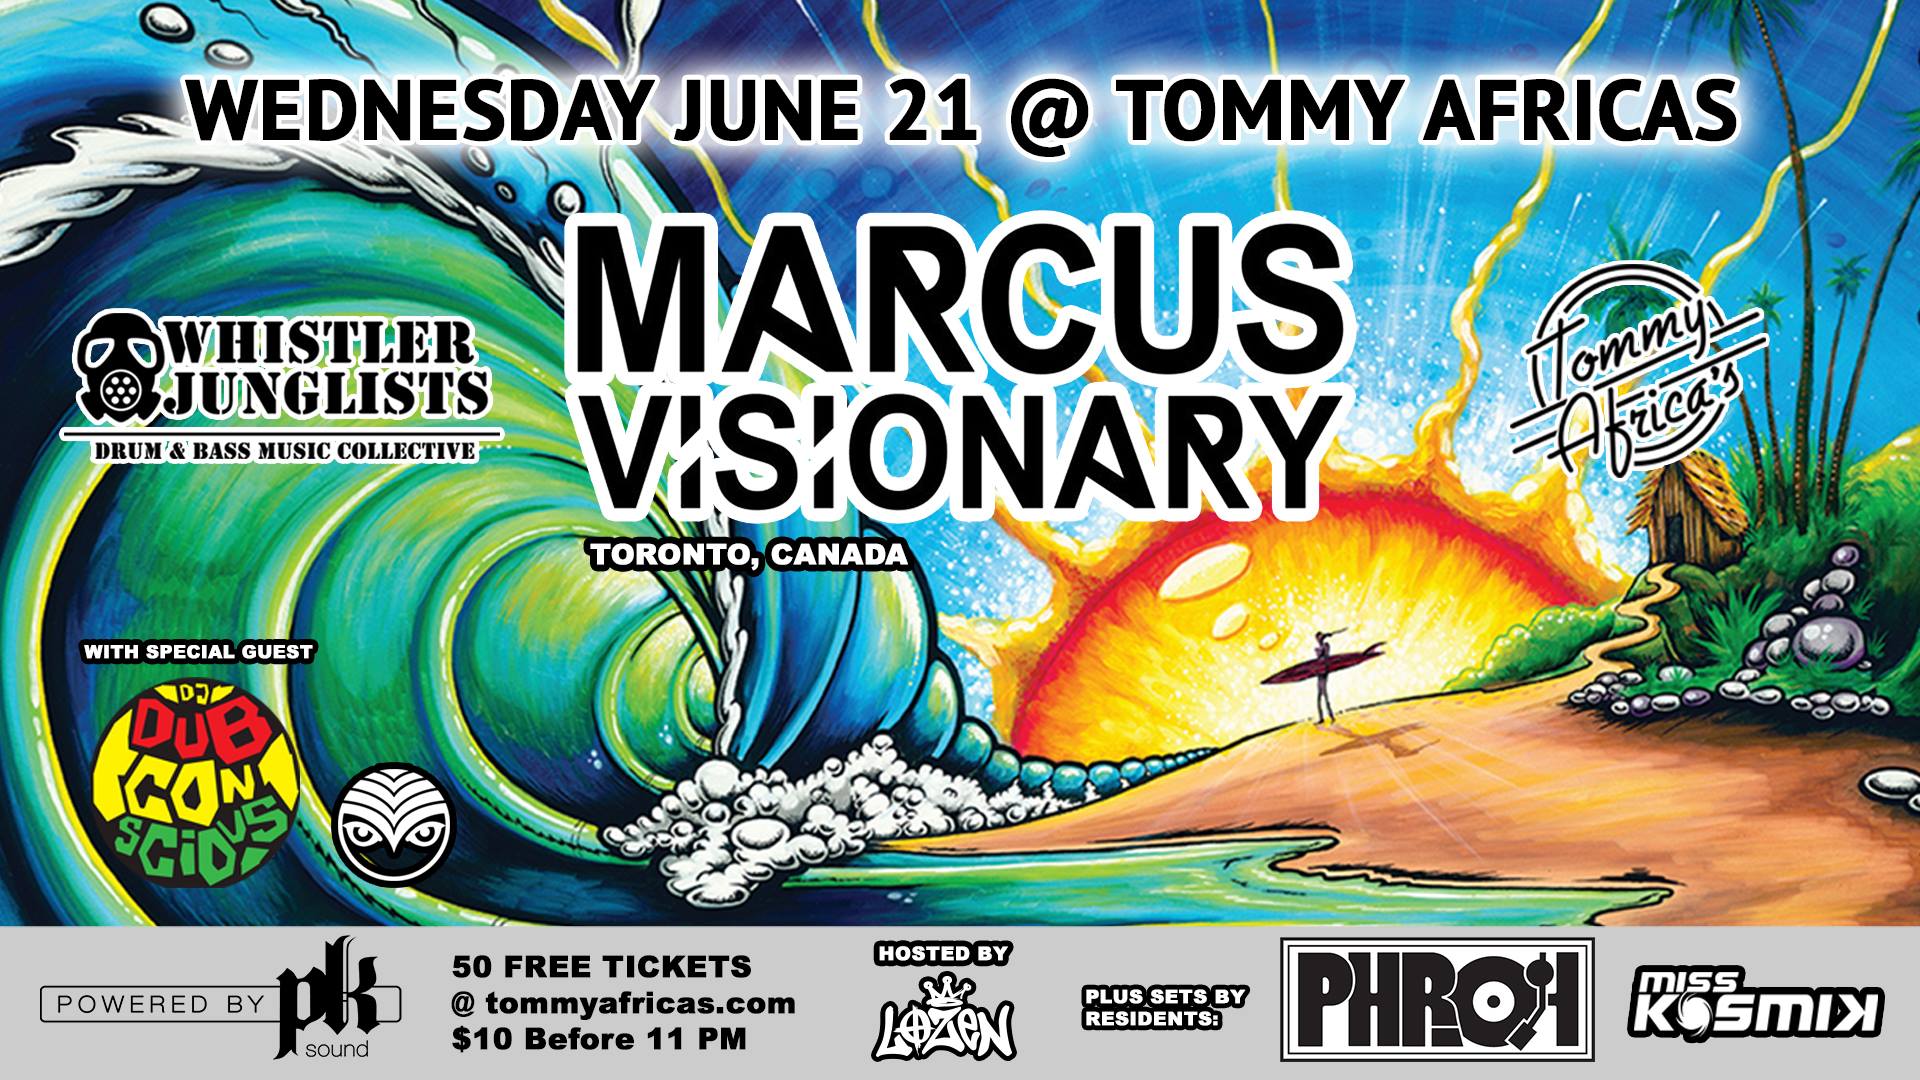 Marcus Visionary in Whistler Big Brum & Bass Show